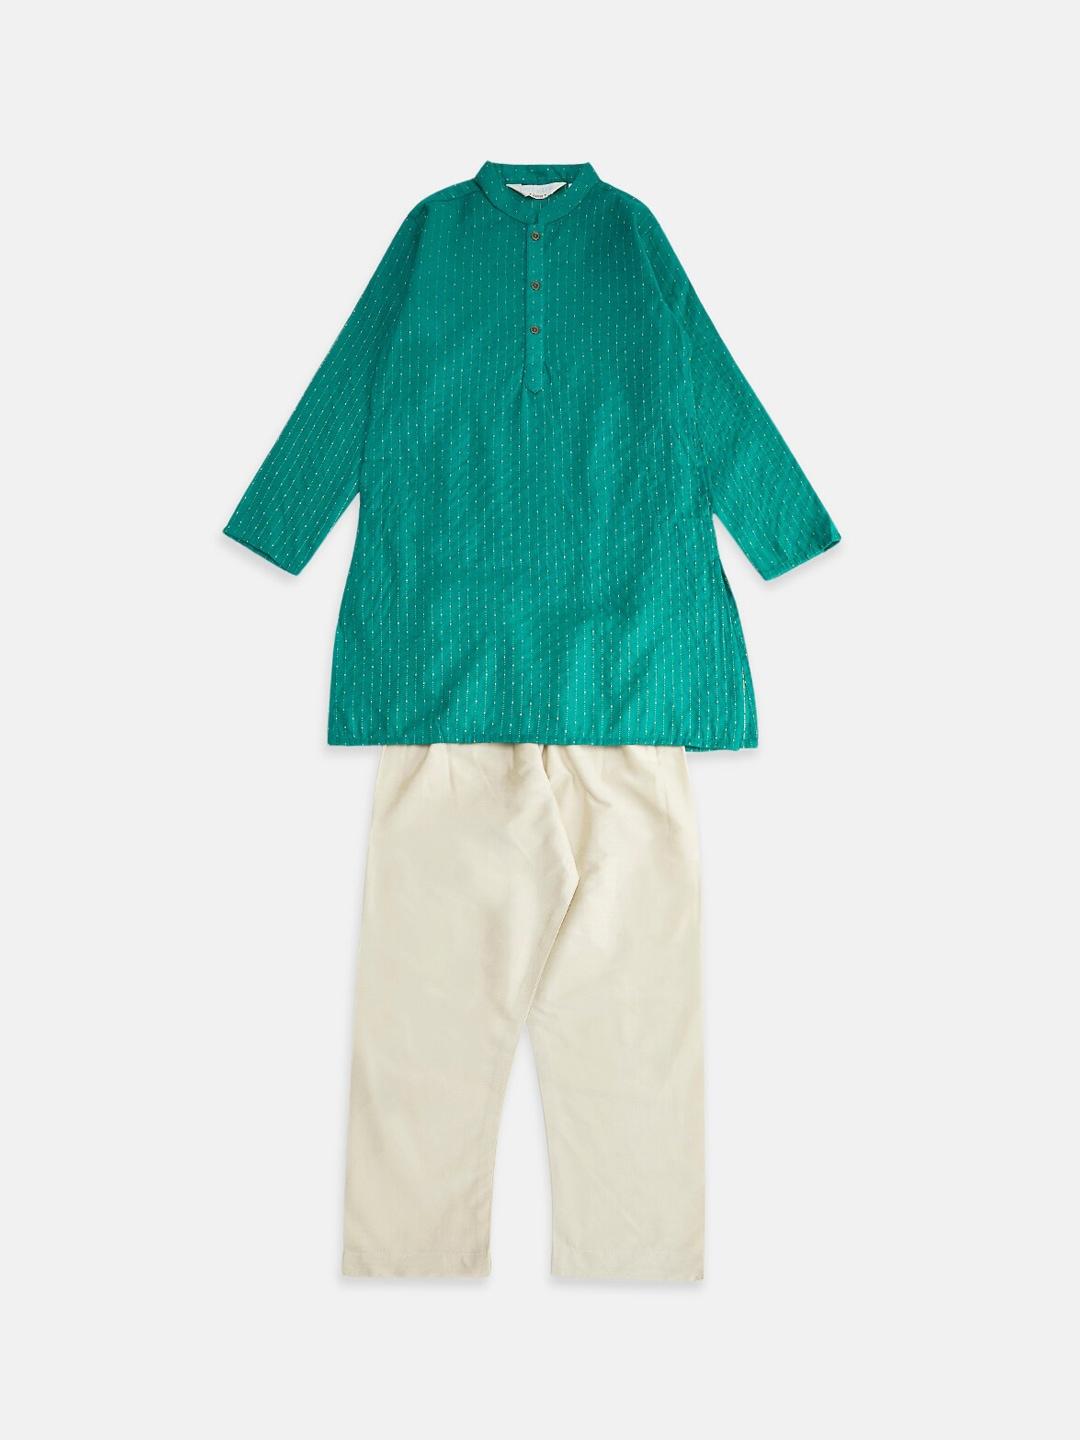 indus route by Pantaloons Boys Teal Green & White Striped Kurta with Pyjama